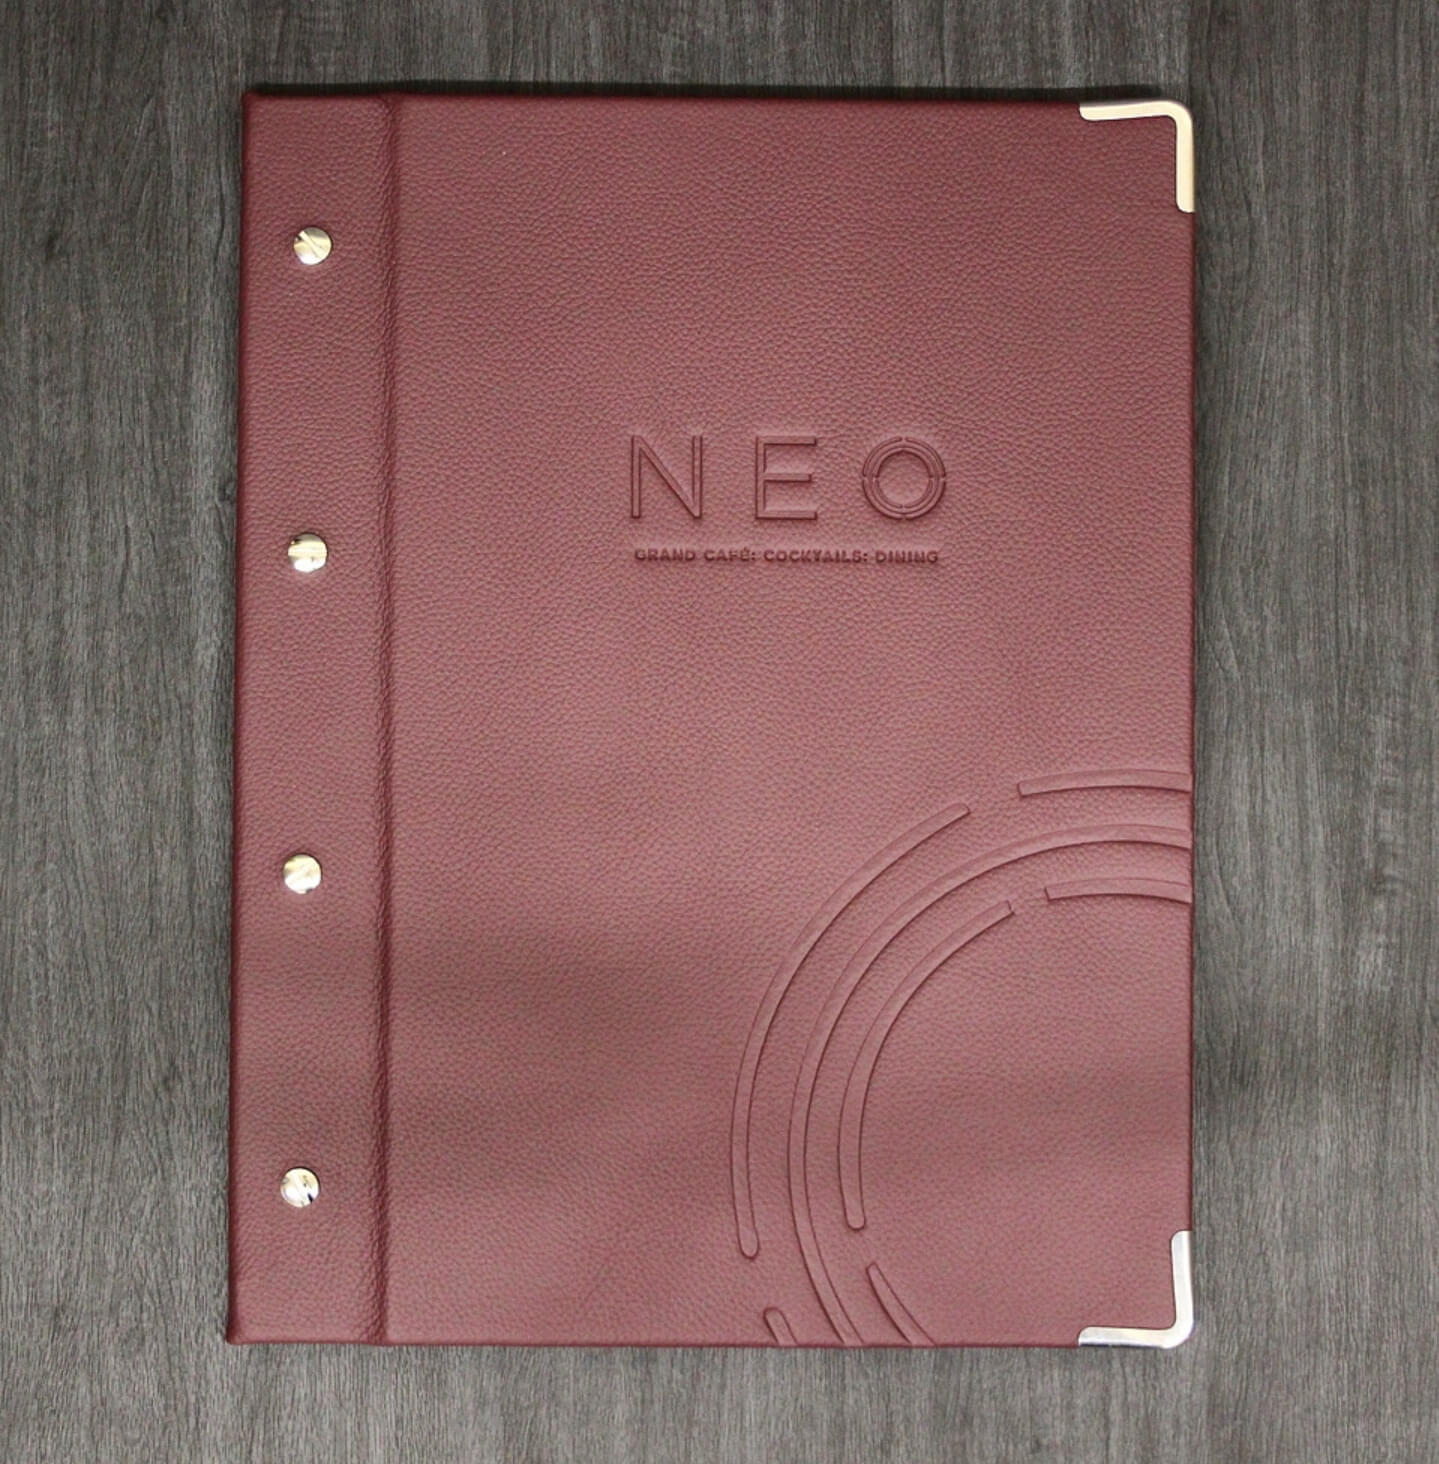 Brussels Full leather Menu Covers